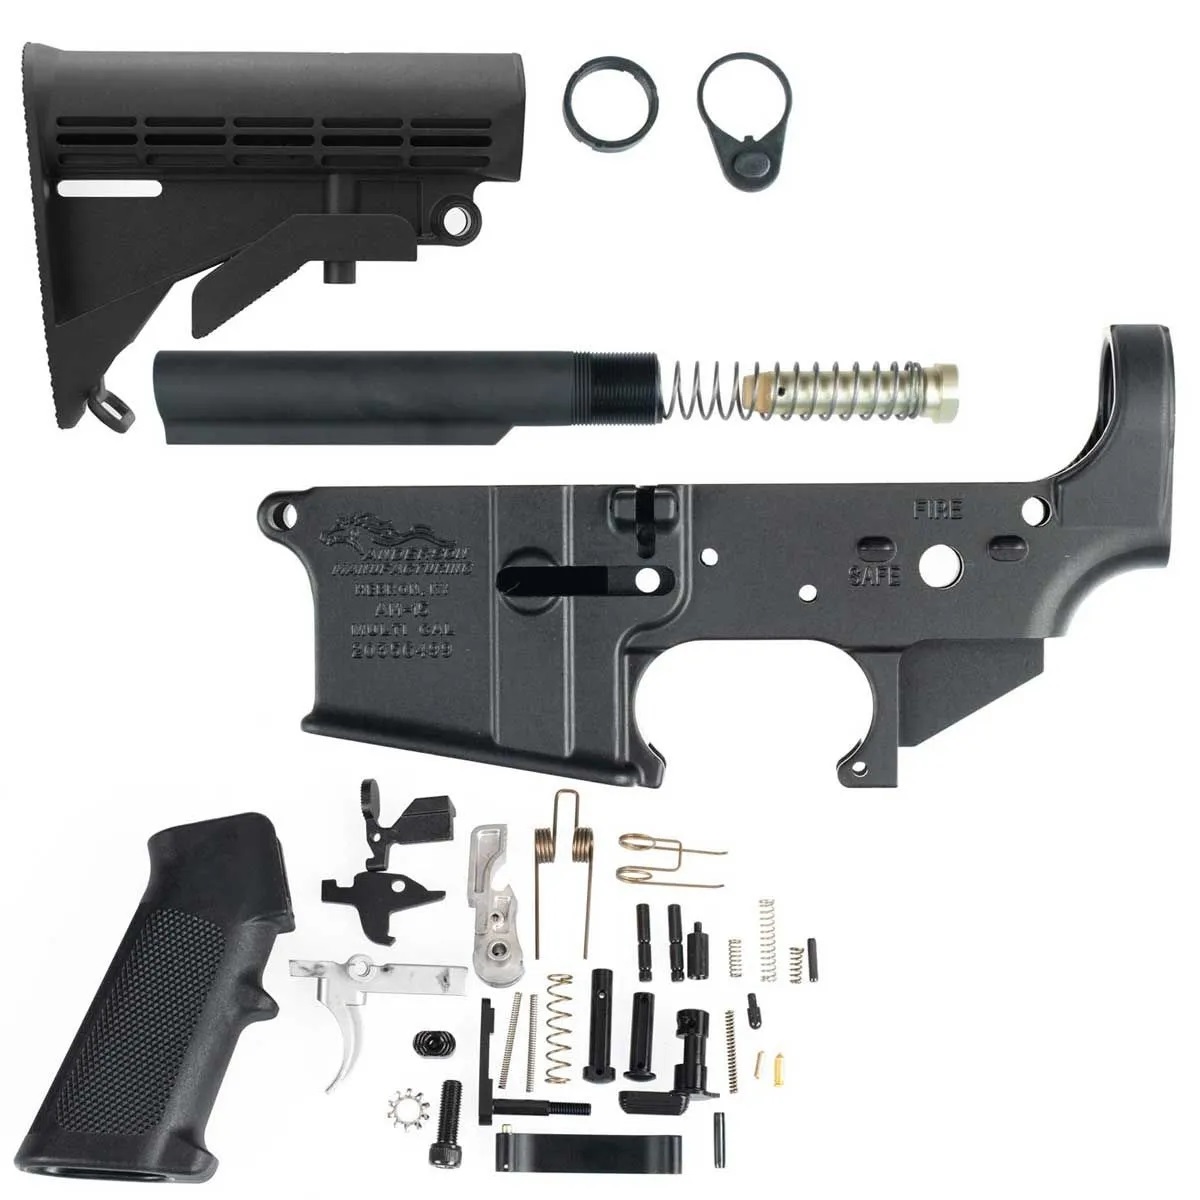 Anderson AR15 Complete Lower Kit With Stock - $299.88